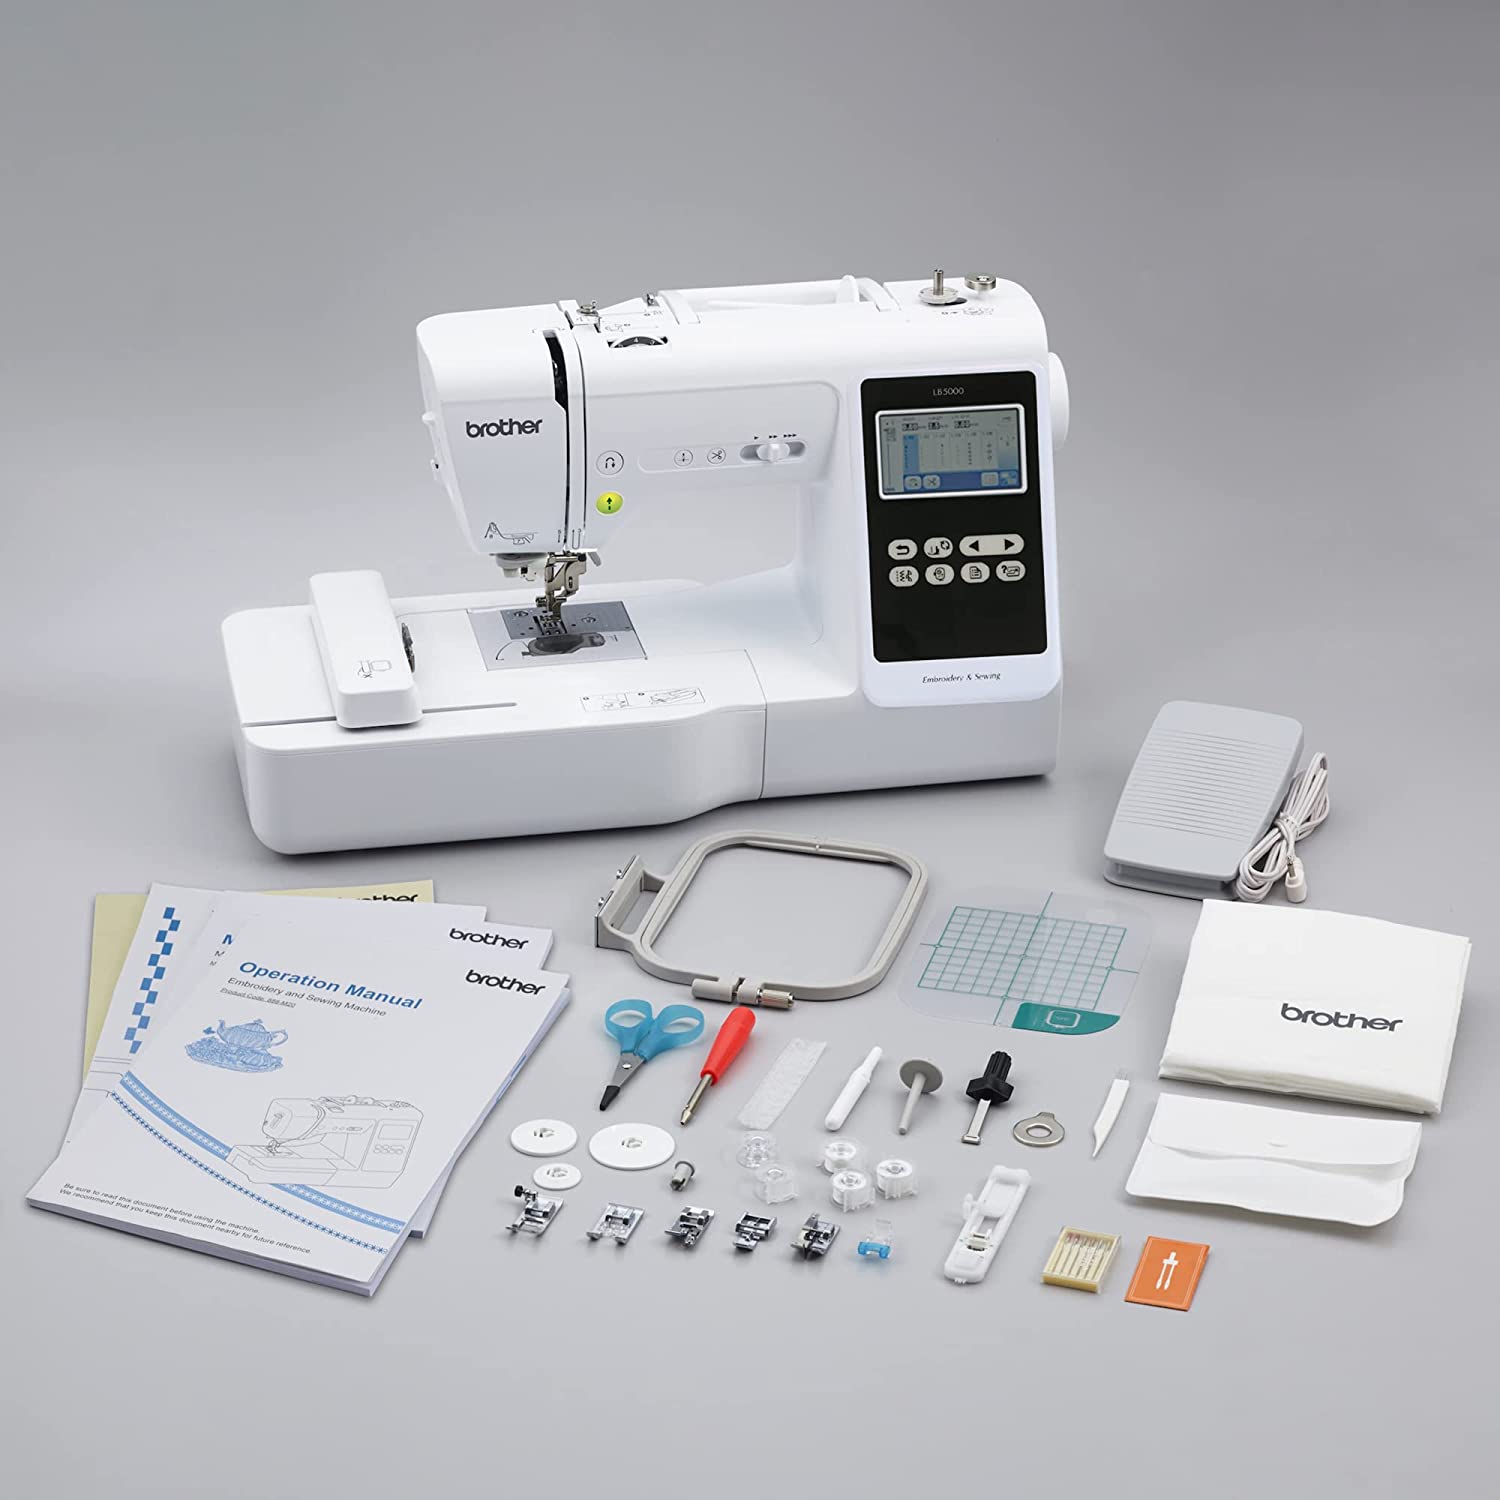 Brother LB5000 Sewing and Embroidery Machine 4x4 for Sale at World Weidner